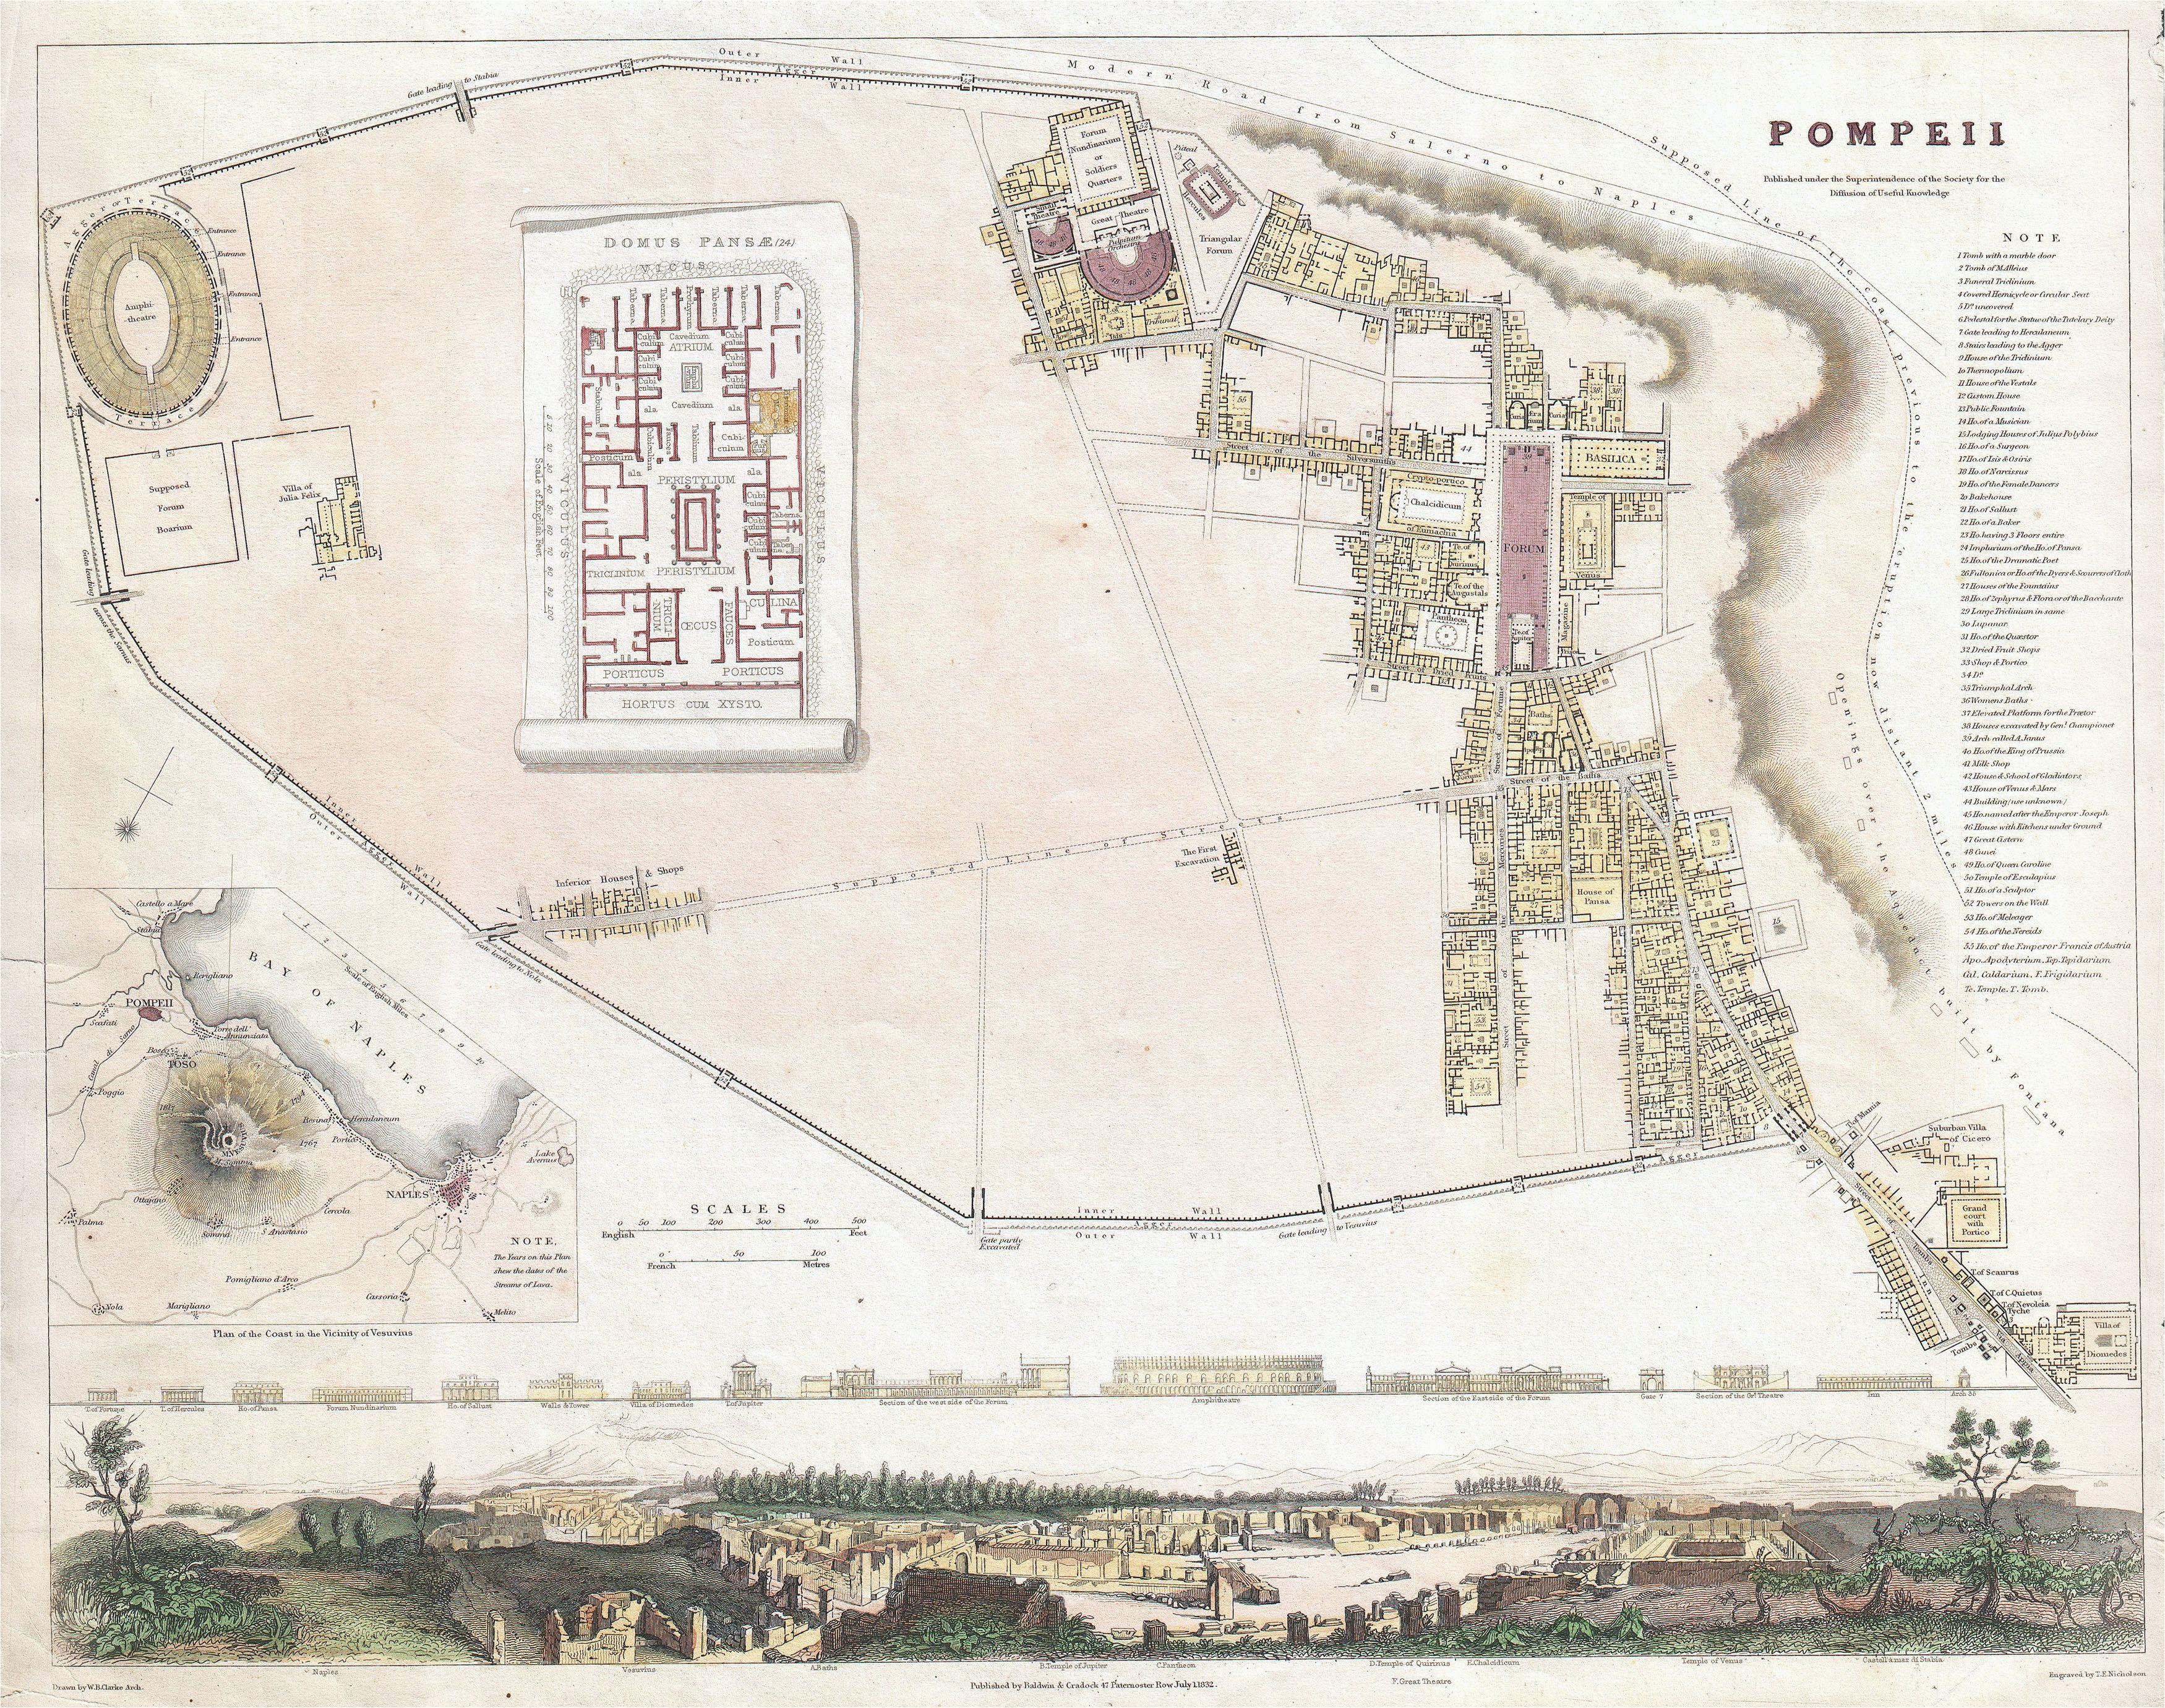 Pompeii On A Map Of Italy File 1832 S D U K City Plan or Map Of Pompeii Italy Geographicus